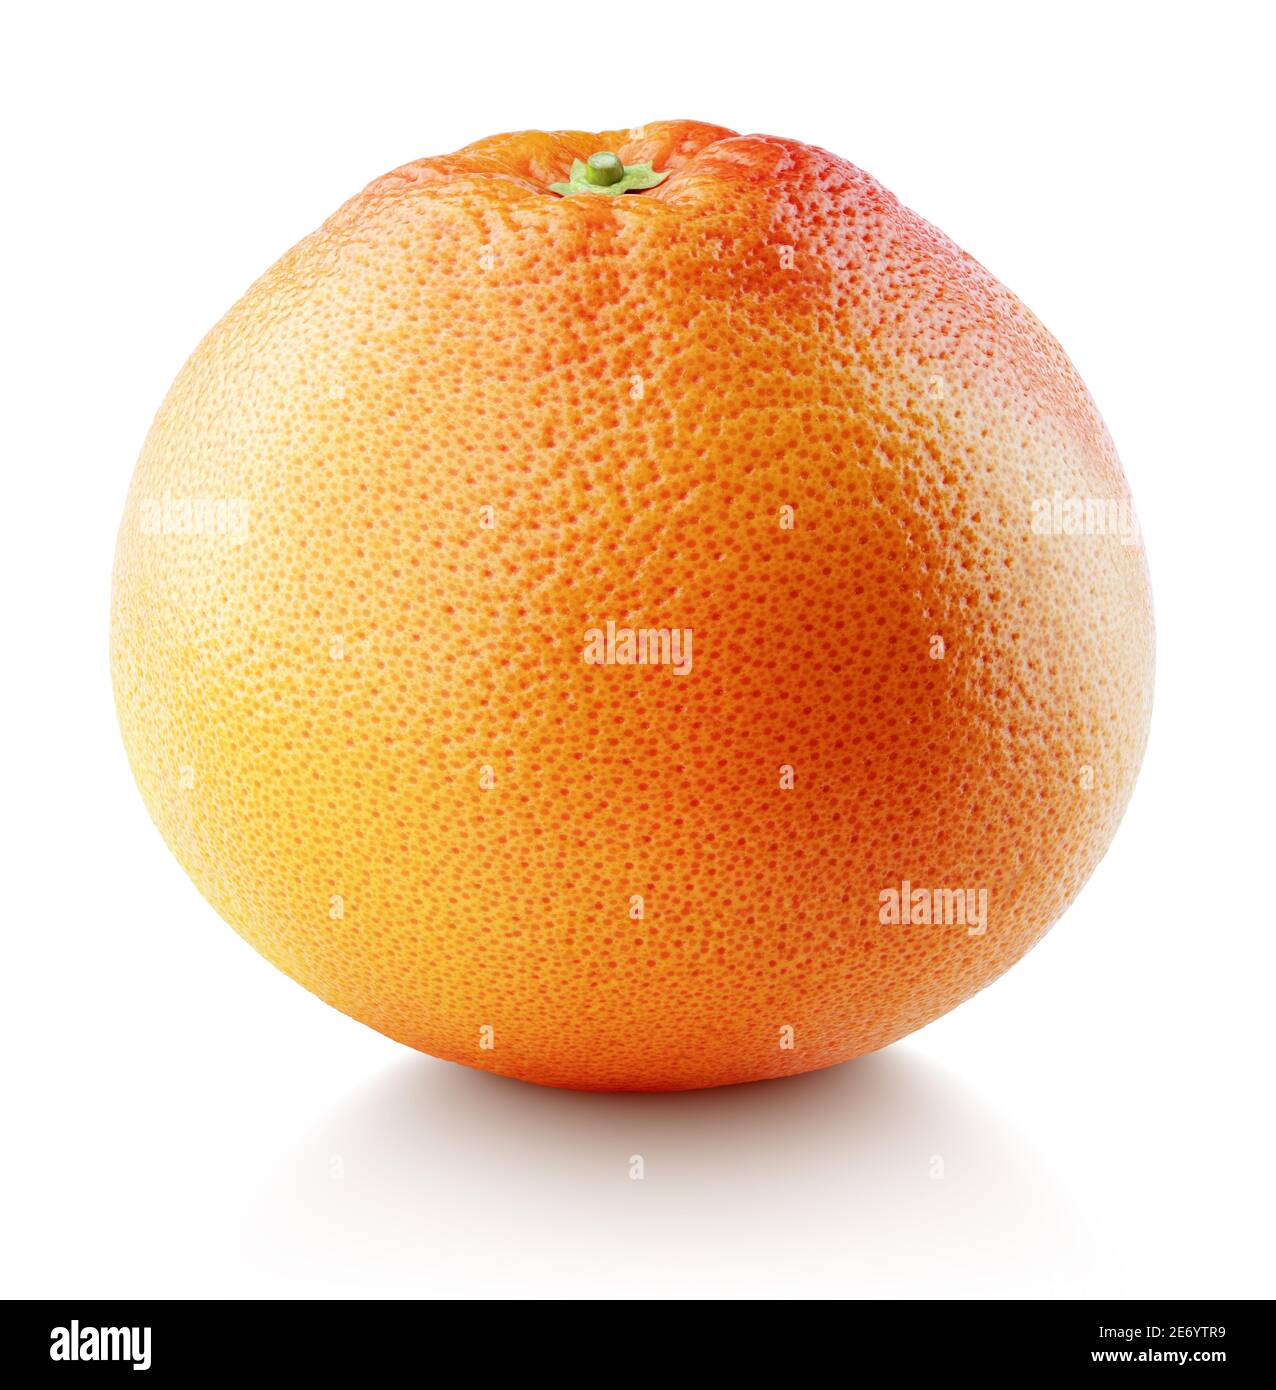 Single grapefruit citrus fruit isolated on white background with clipping path. Full depth of field. Stock Photo